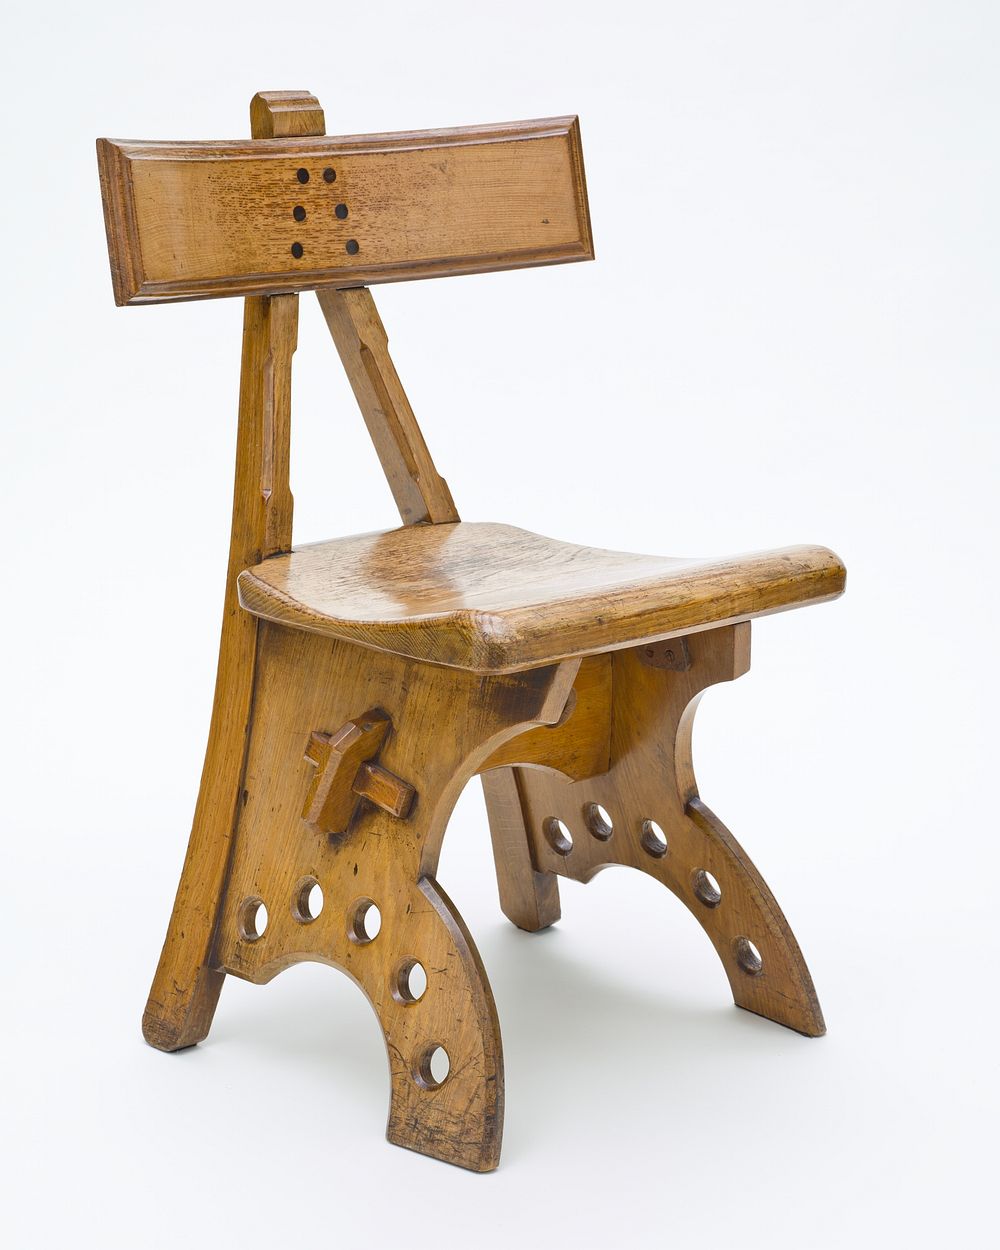 Side chair by Edward Welby Pugin